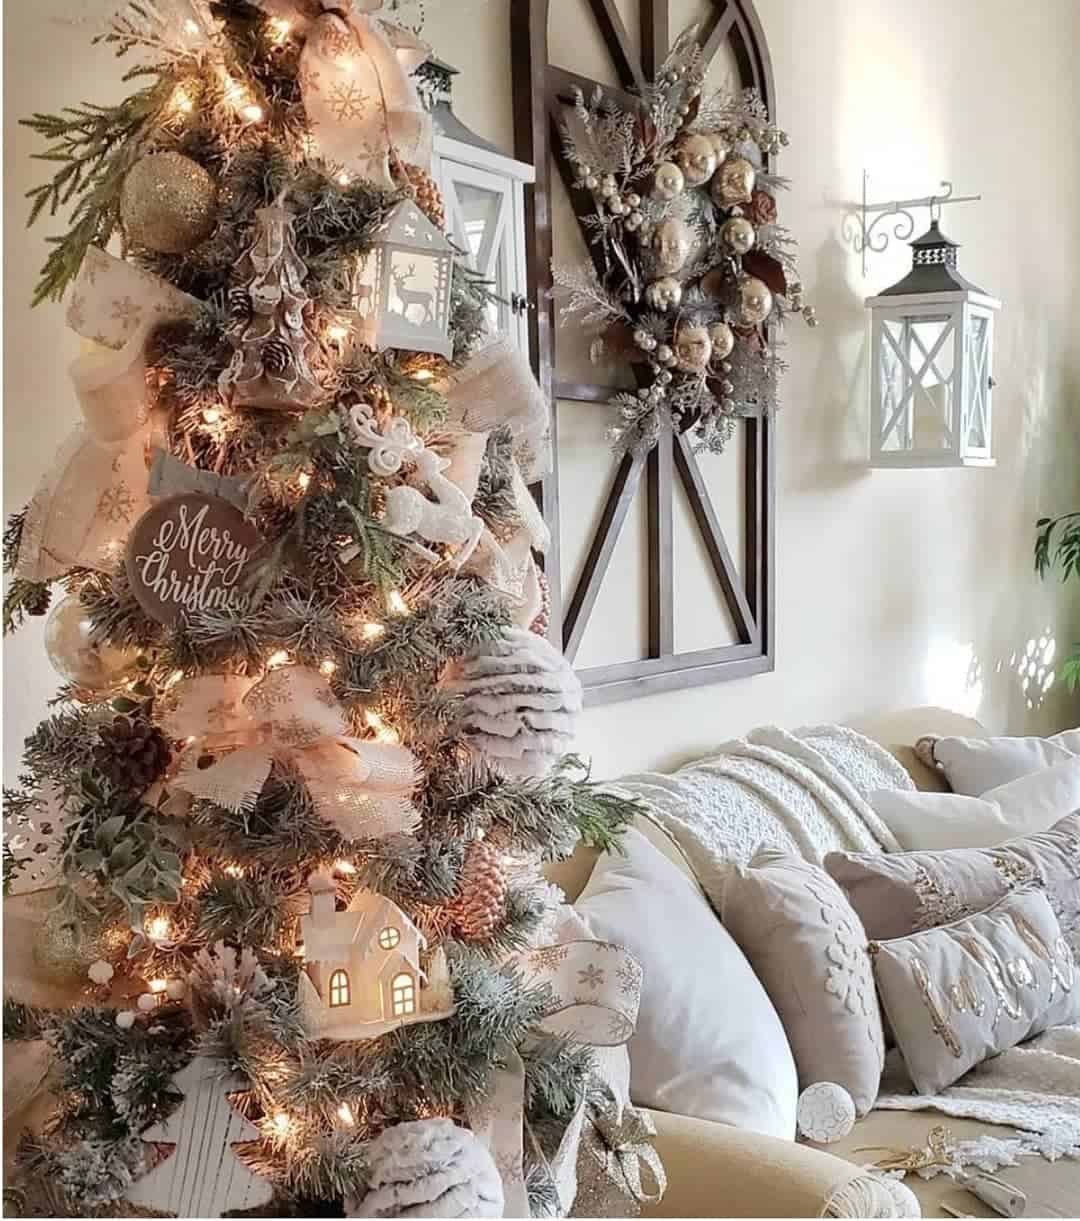 Farmhouse-inspired Living Room With Decorated Christmas Tree - Soul & Lane